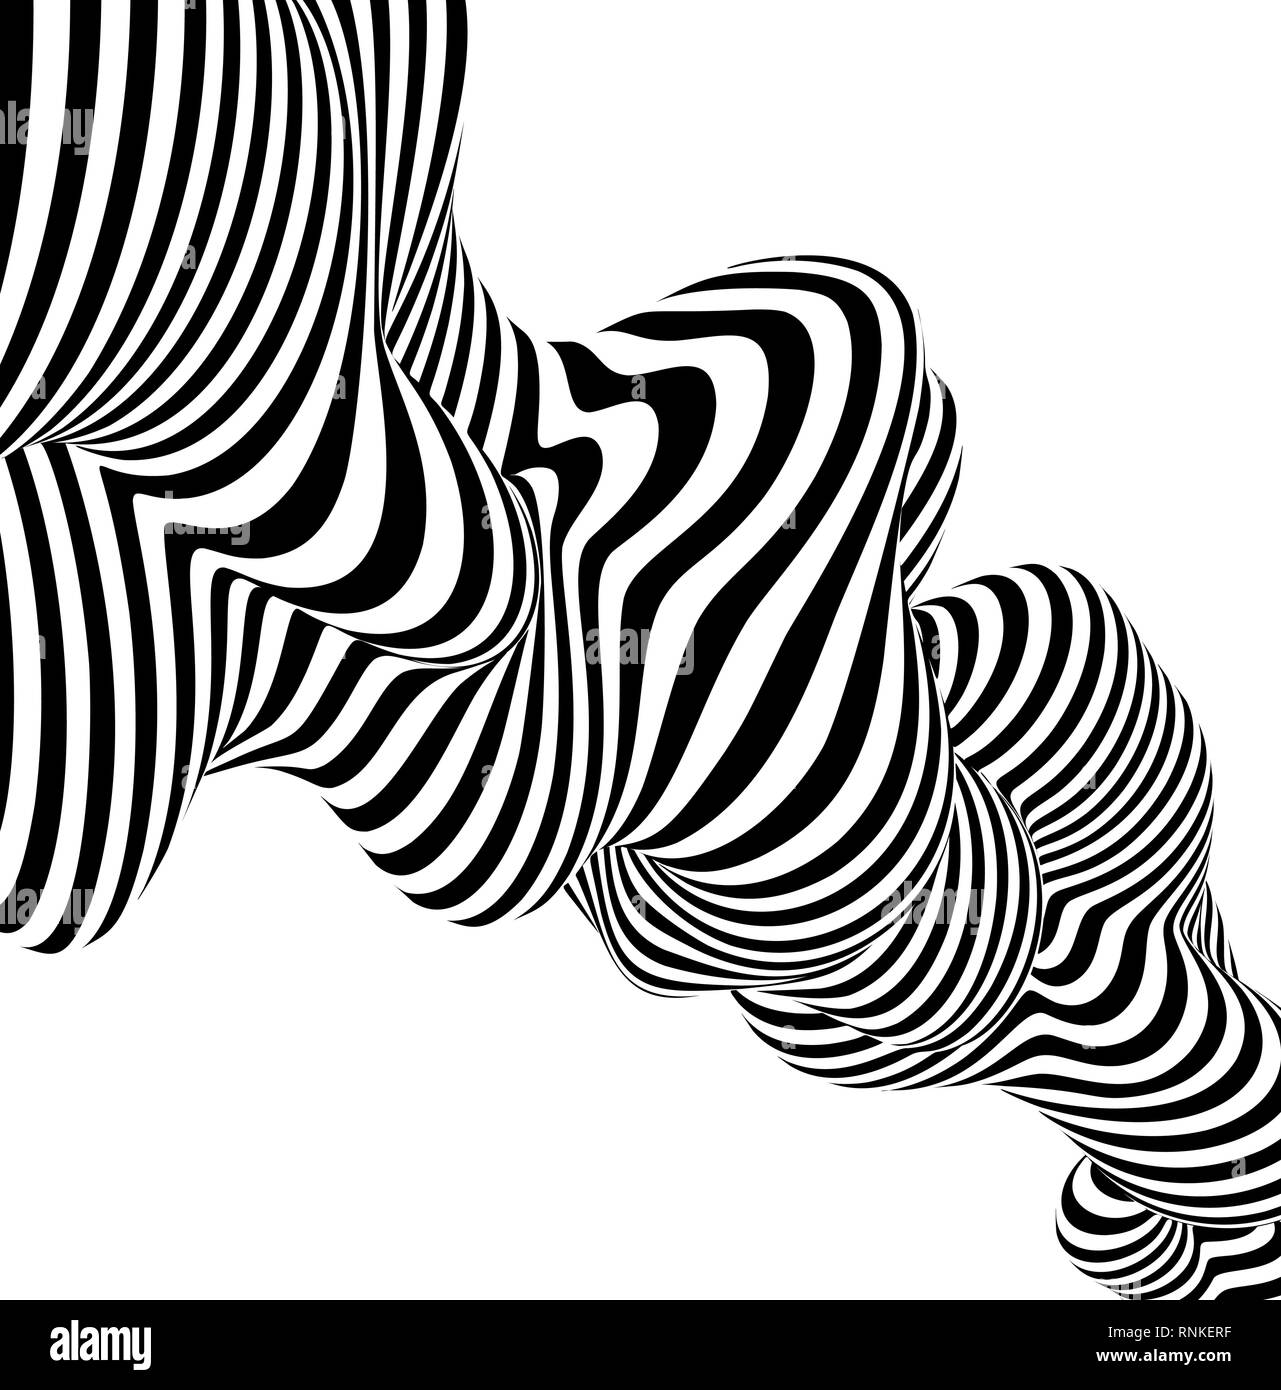 Abstract striped background wave design black and white line. Vector illustration Stock Vector